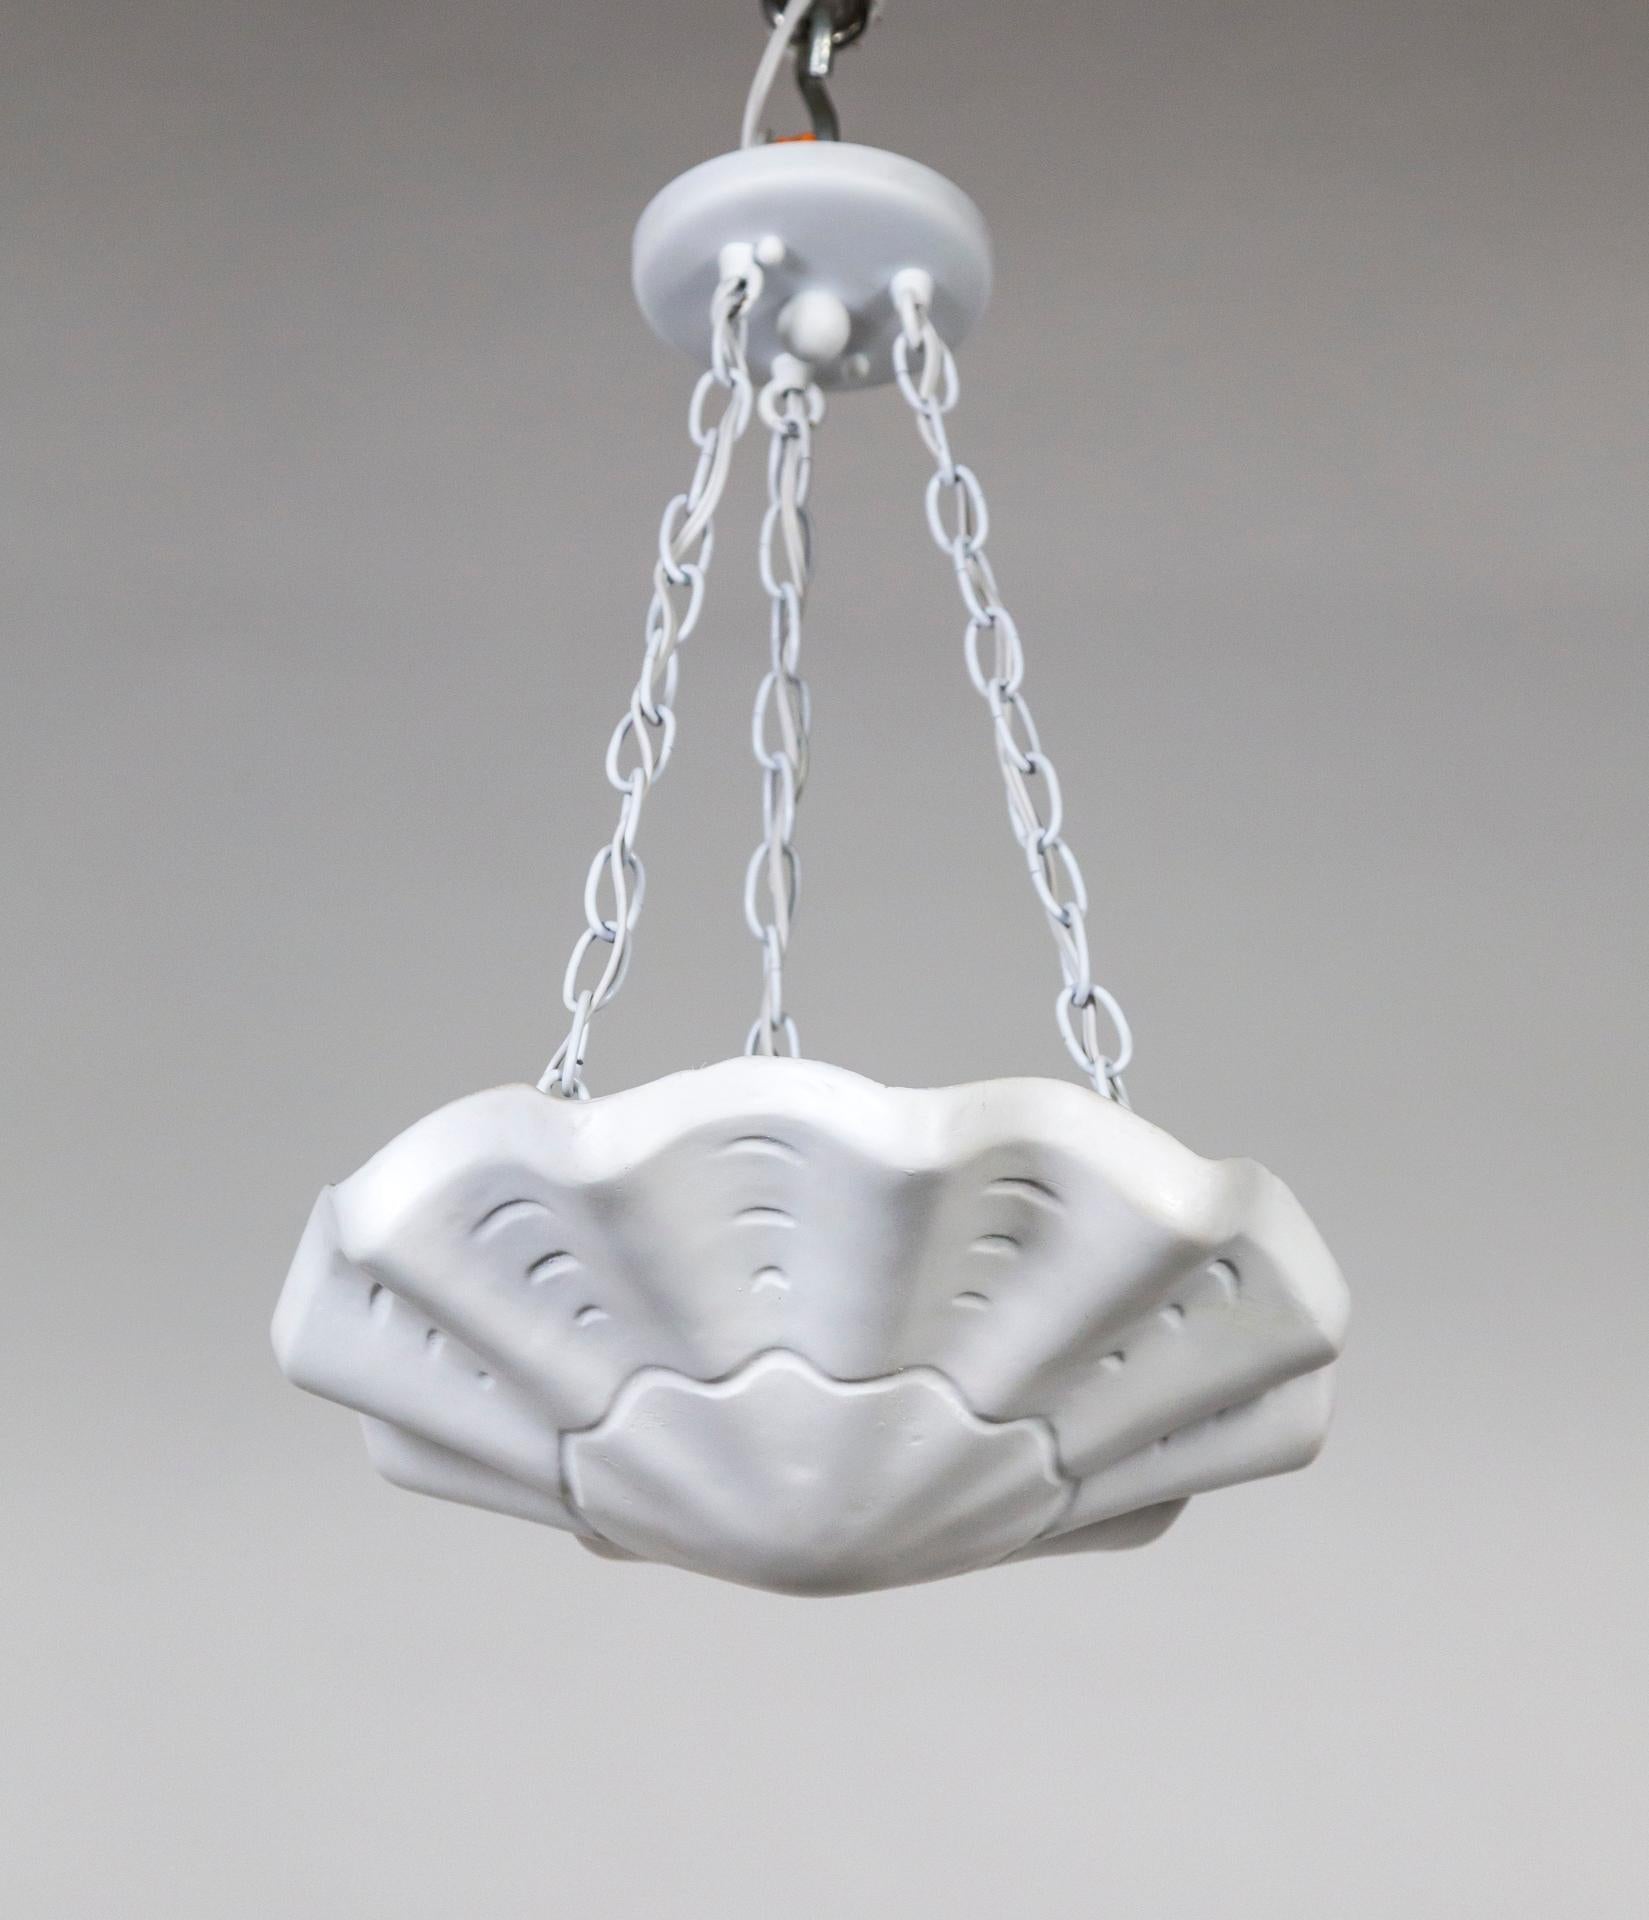 A plaster pendant in an undulating shell shape, with scalloped edges and imprinted lines accentuating the form. A newer take on Francis Elkins's 1940s plaster plafonnier. Hanging by three white chains; with 3 medium base ceramic sockets.